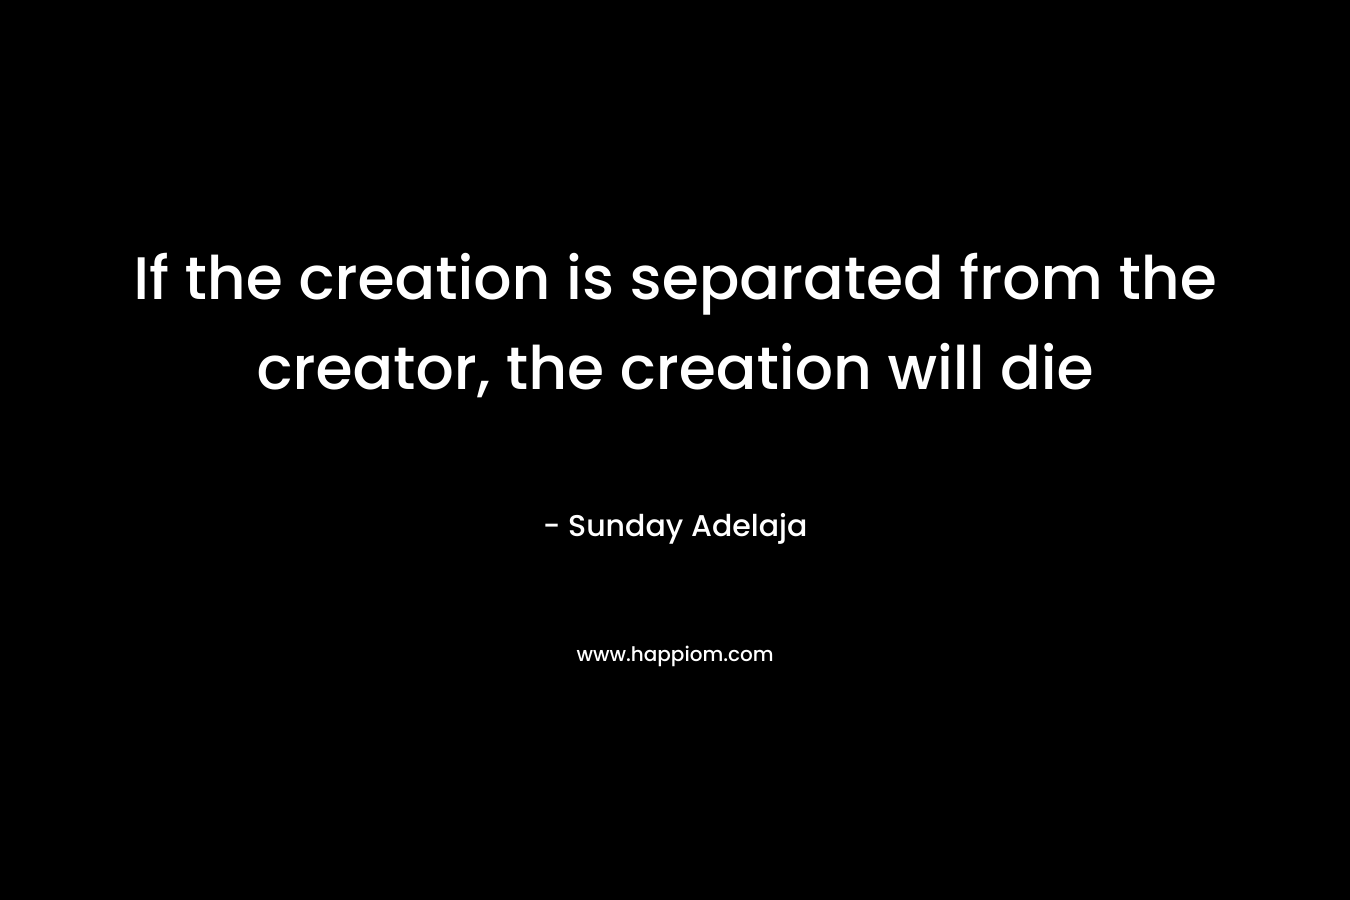 If the creation is separated from the creator, the creation will die